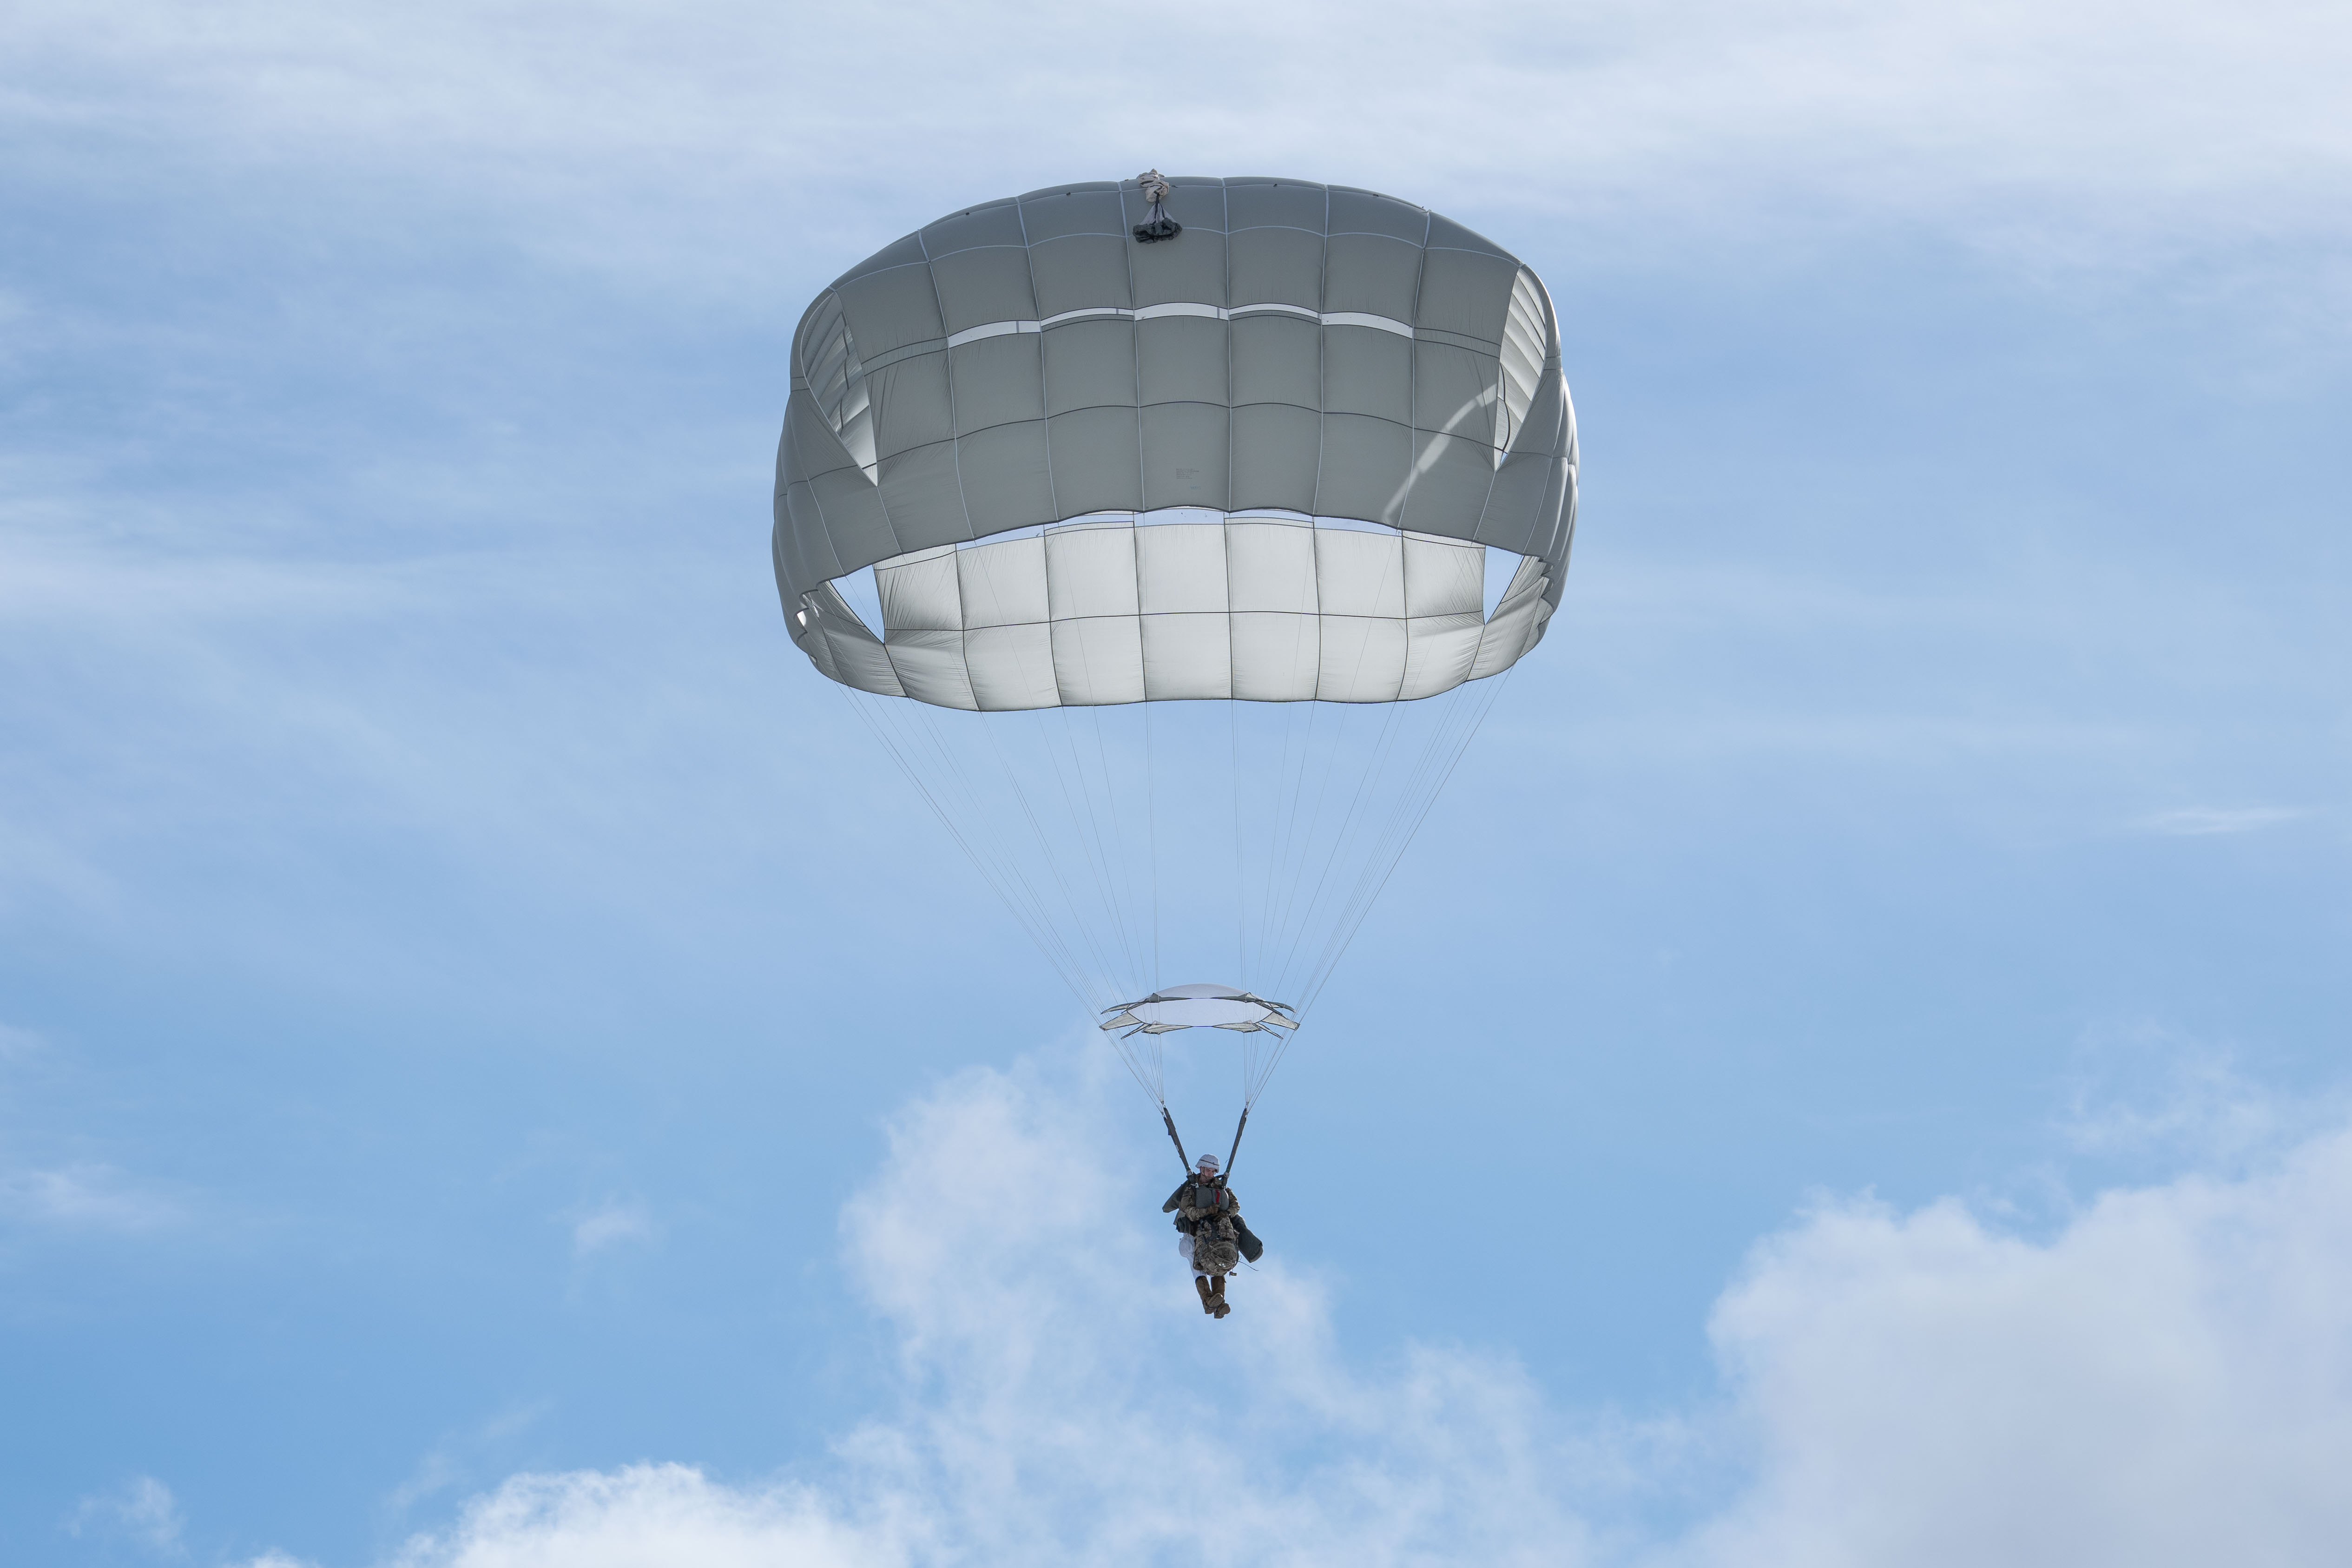 U.S. paratroopers using T-11 parachutes, conduct an airborne